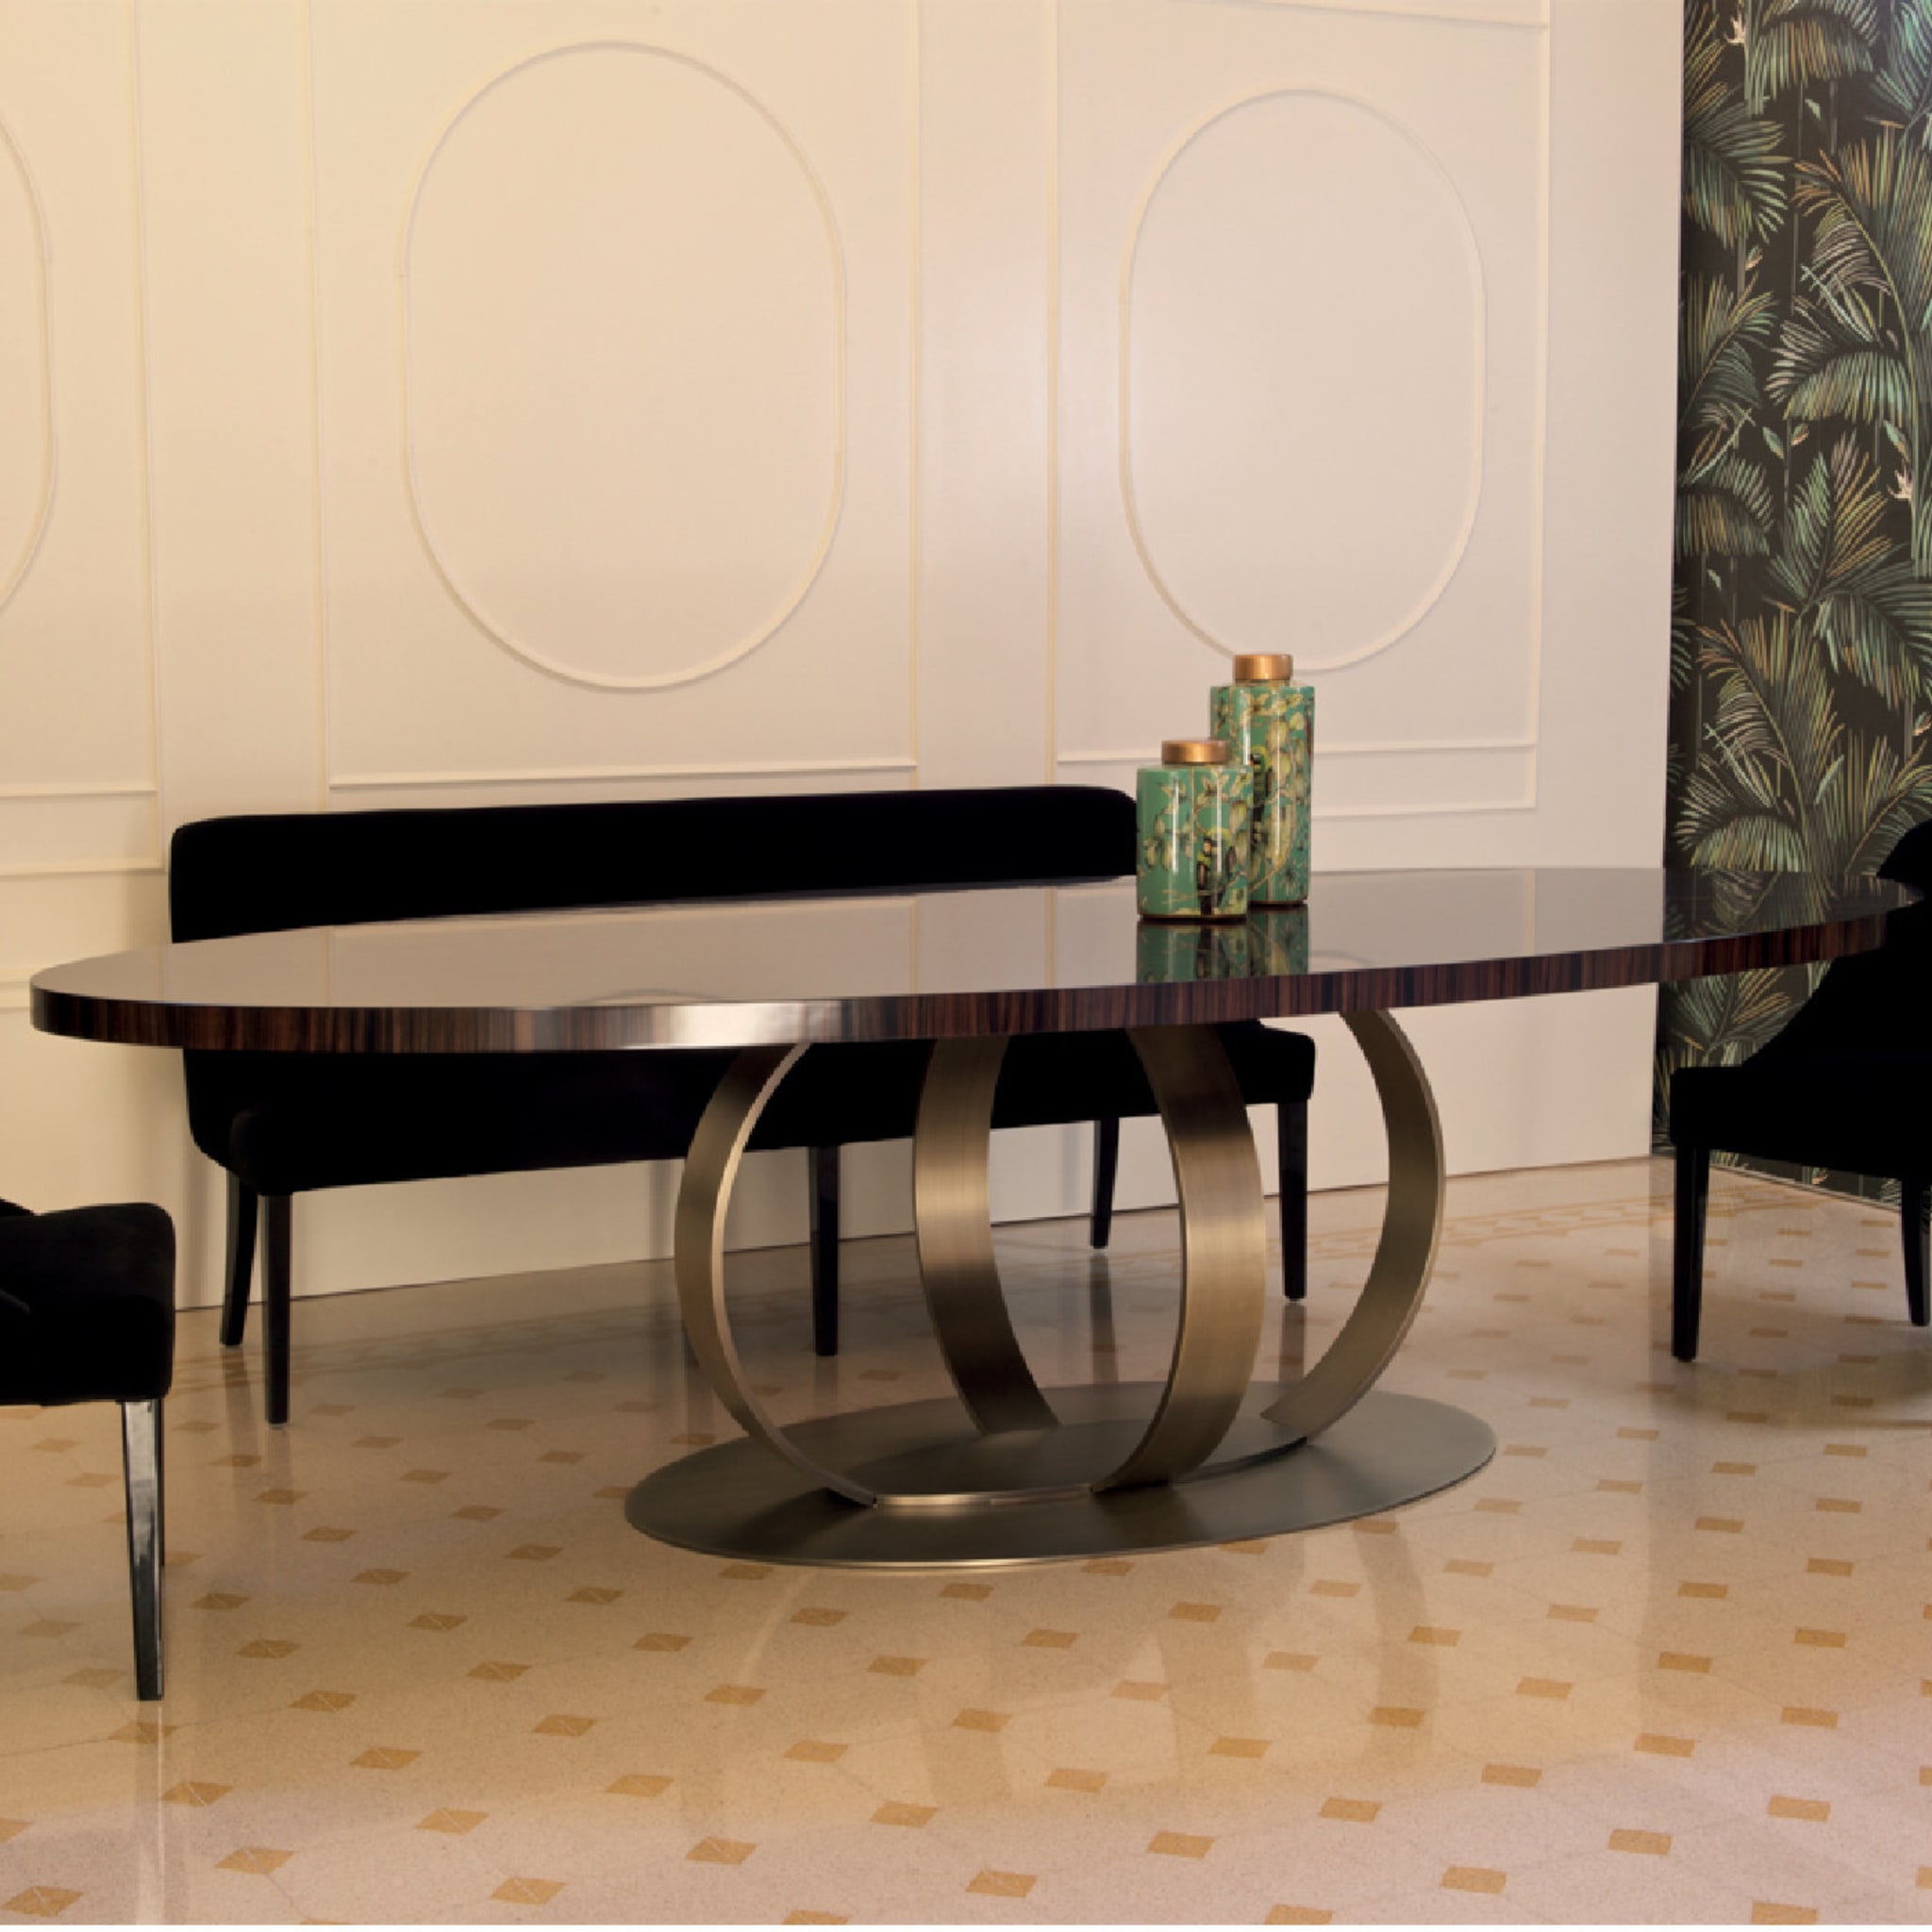 Andrew Oval Dining Table - Alternative view 3